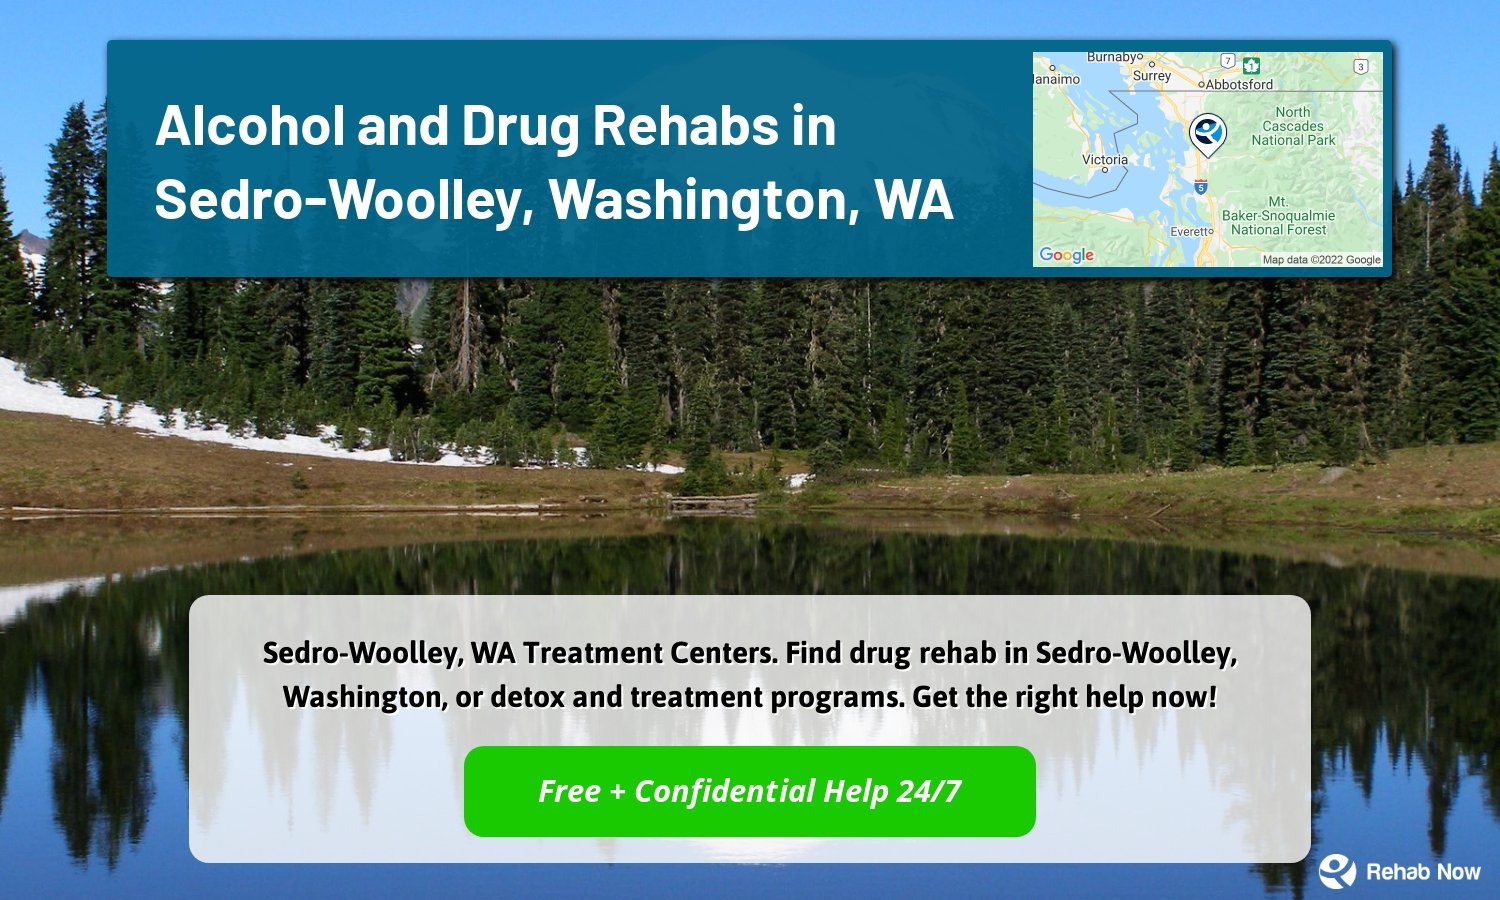 Sedro-Woolley, WA Treatment Centers. Find drug rehab in Sedro-Woolley, Washington, or detox and treatment programs. Get the right help now!